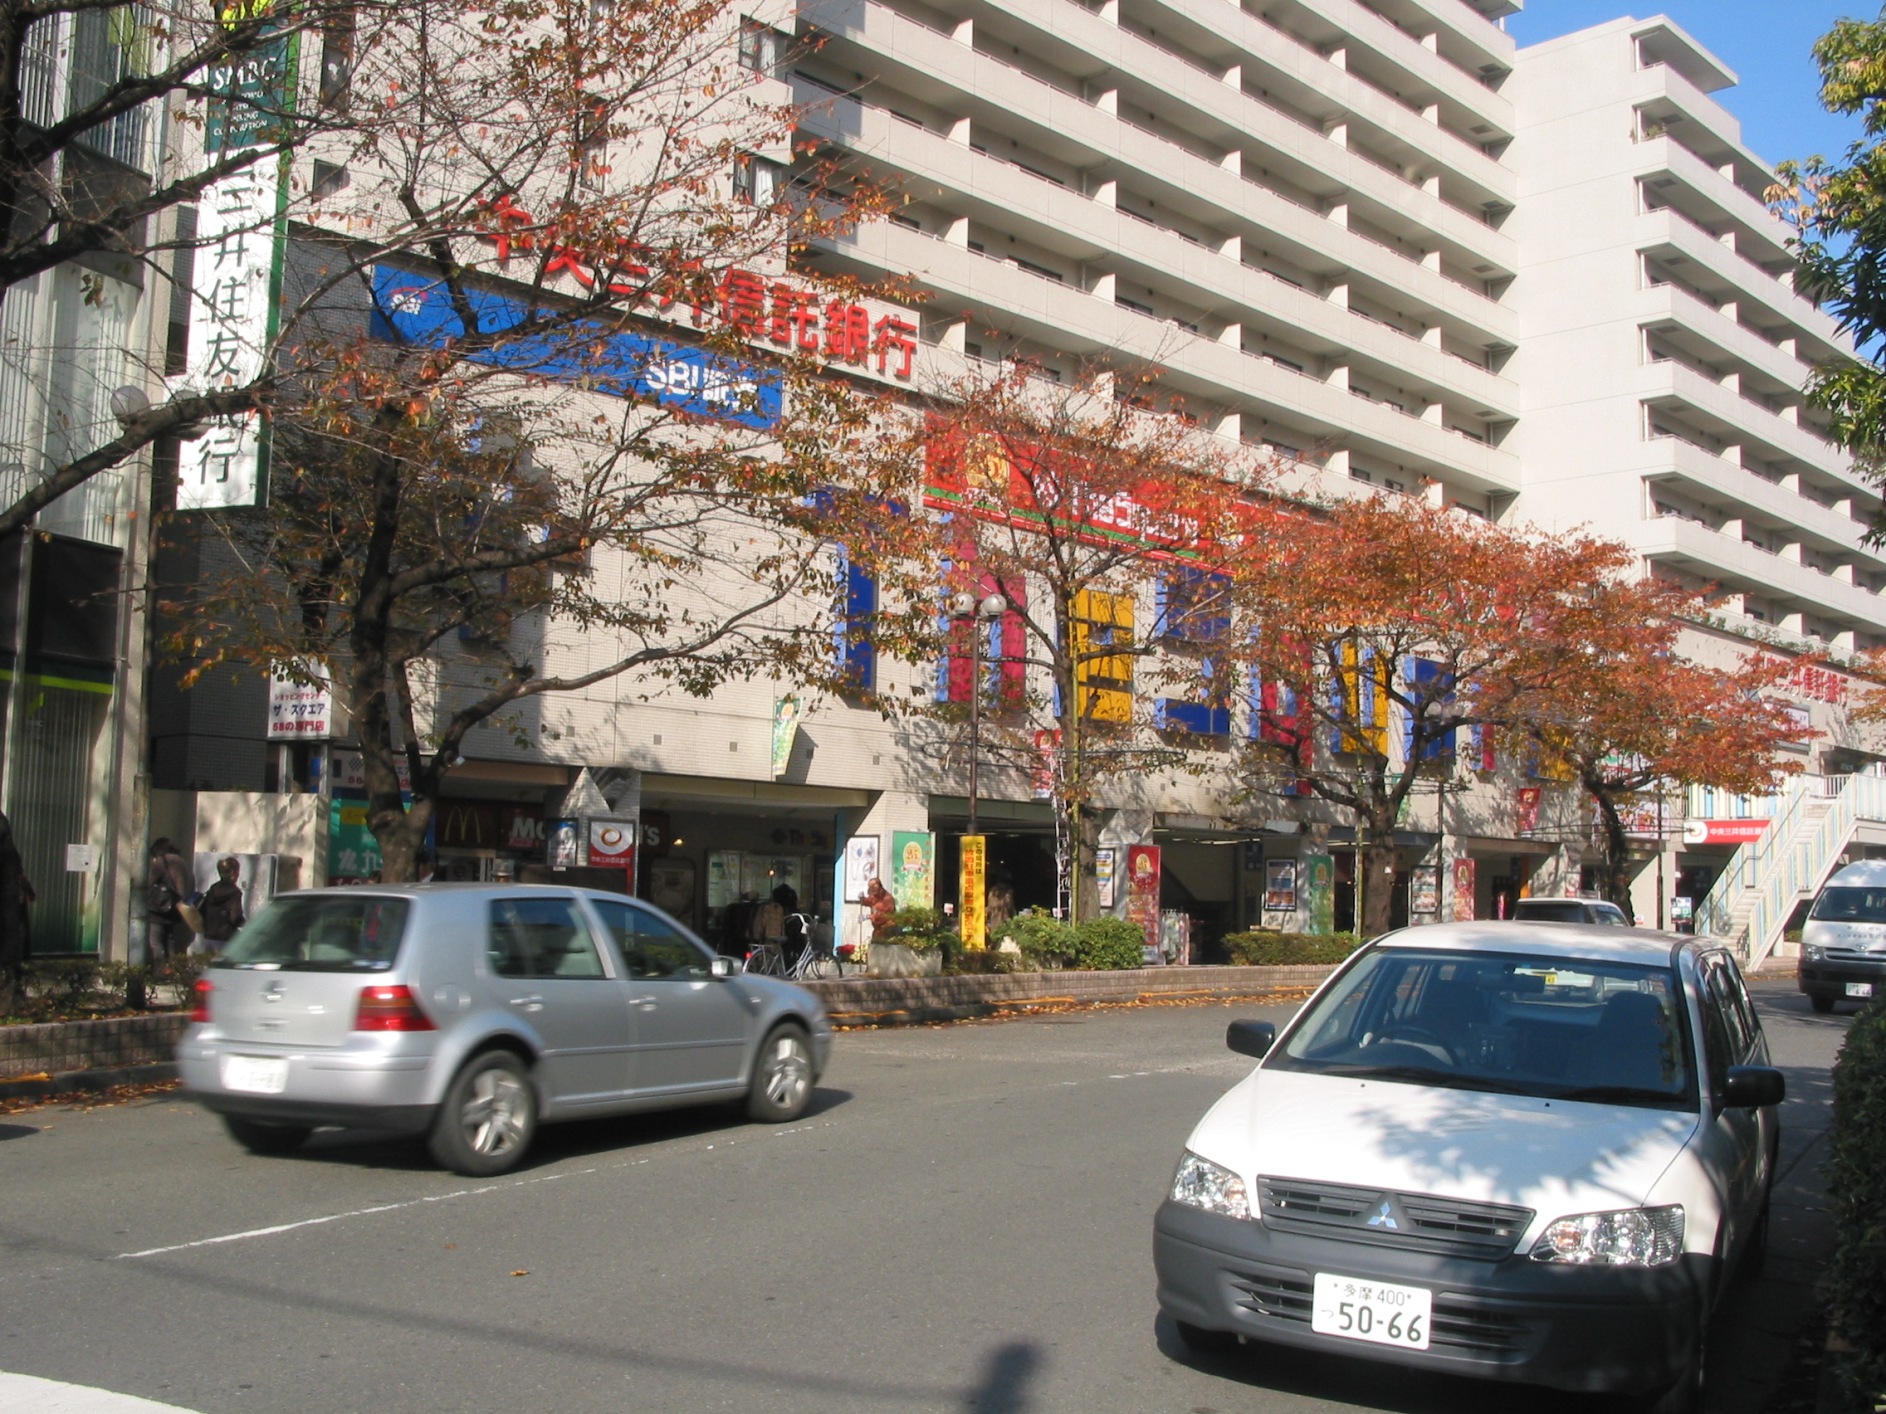 Shopping centre. The ・ 490m until the Square (shopping center)